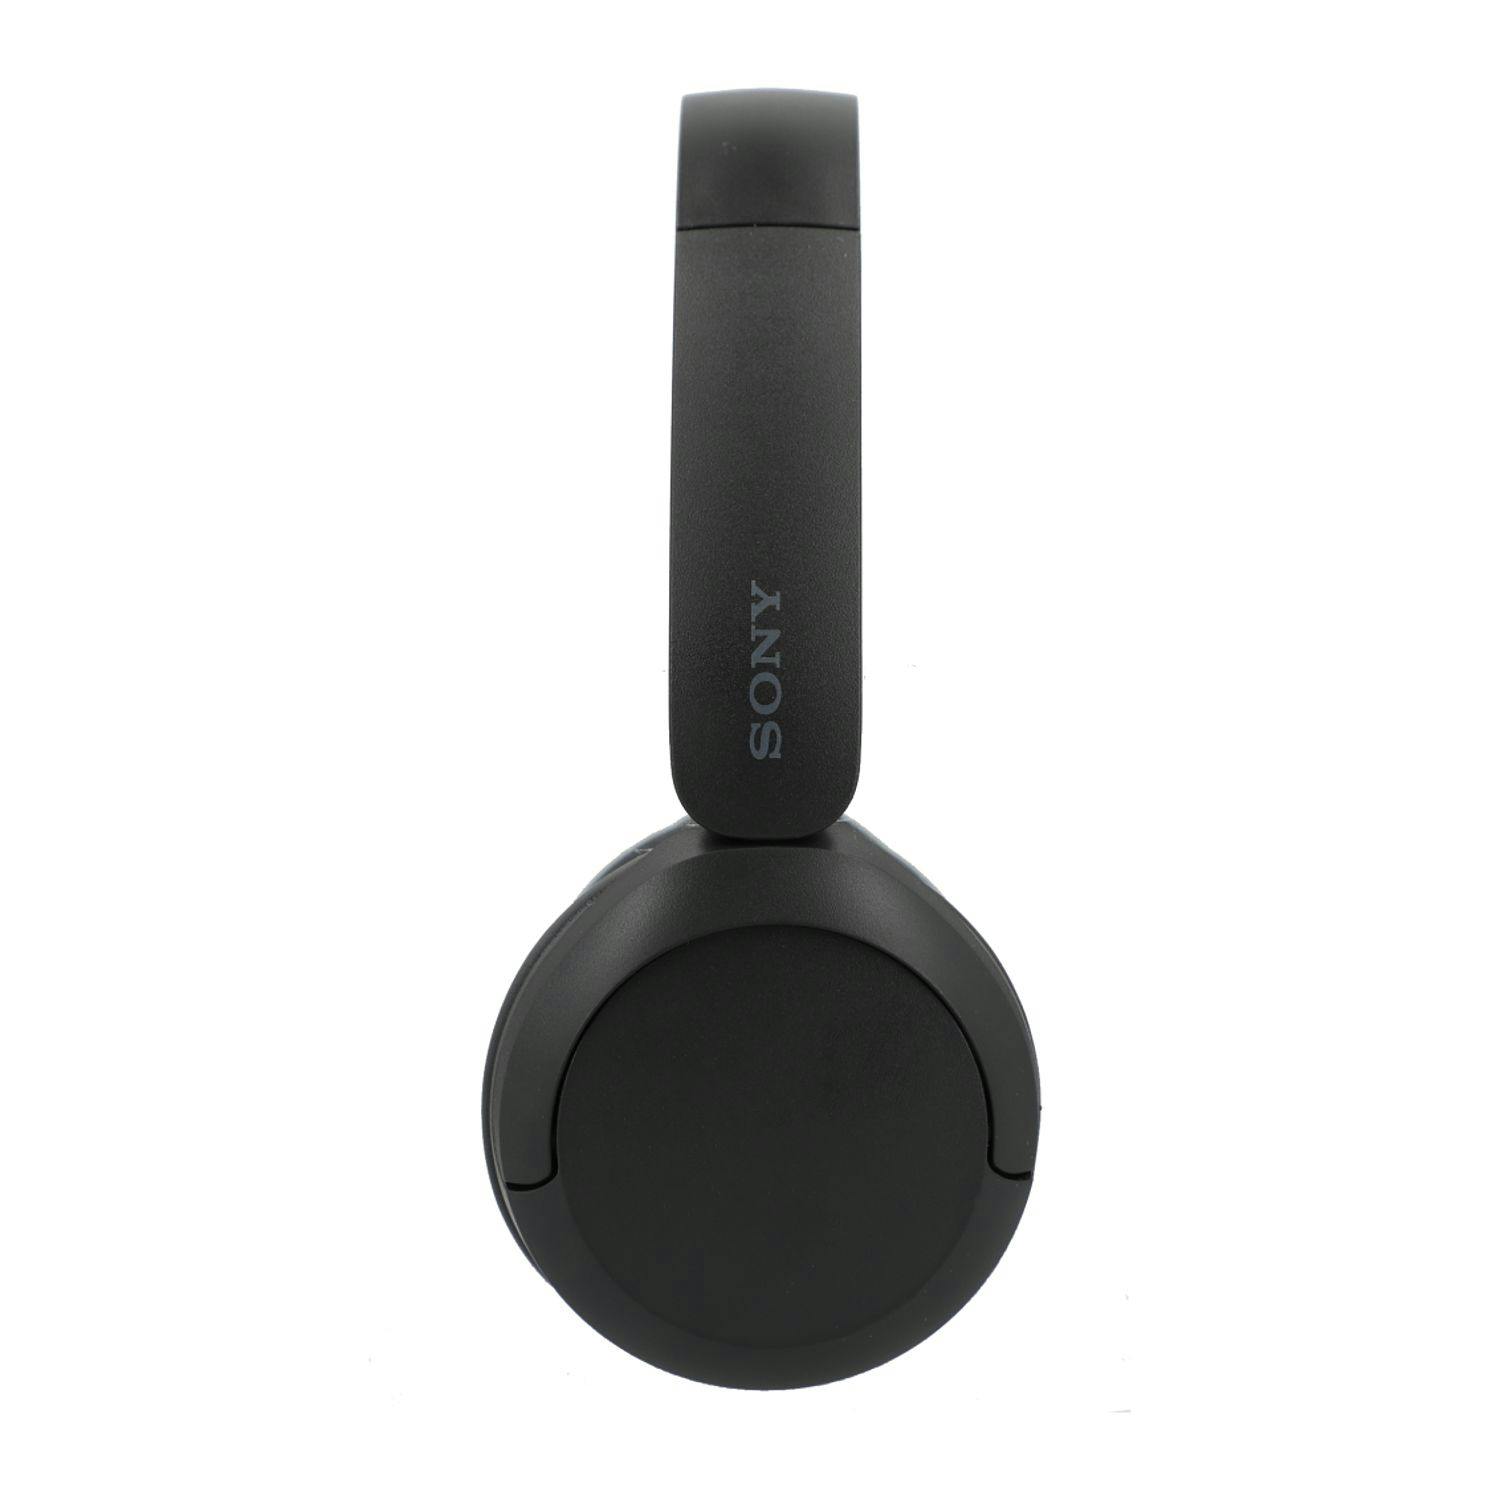 Sony WH-CH520 Wireless Headphones with Microphone - additional Image 1